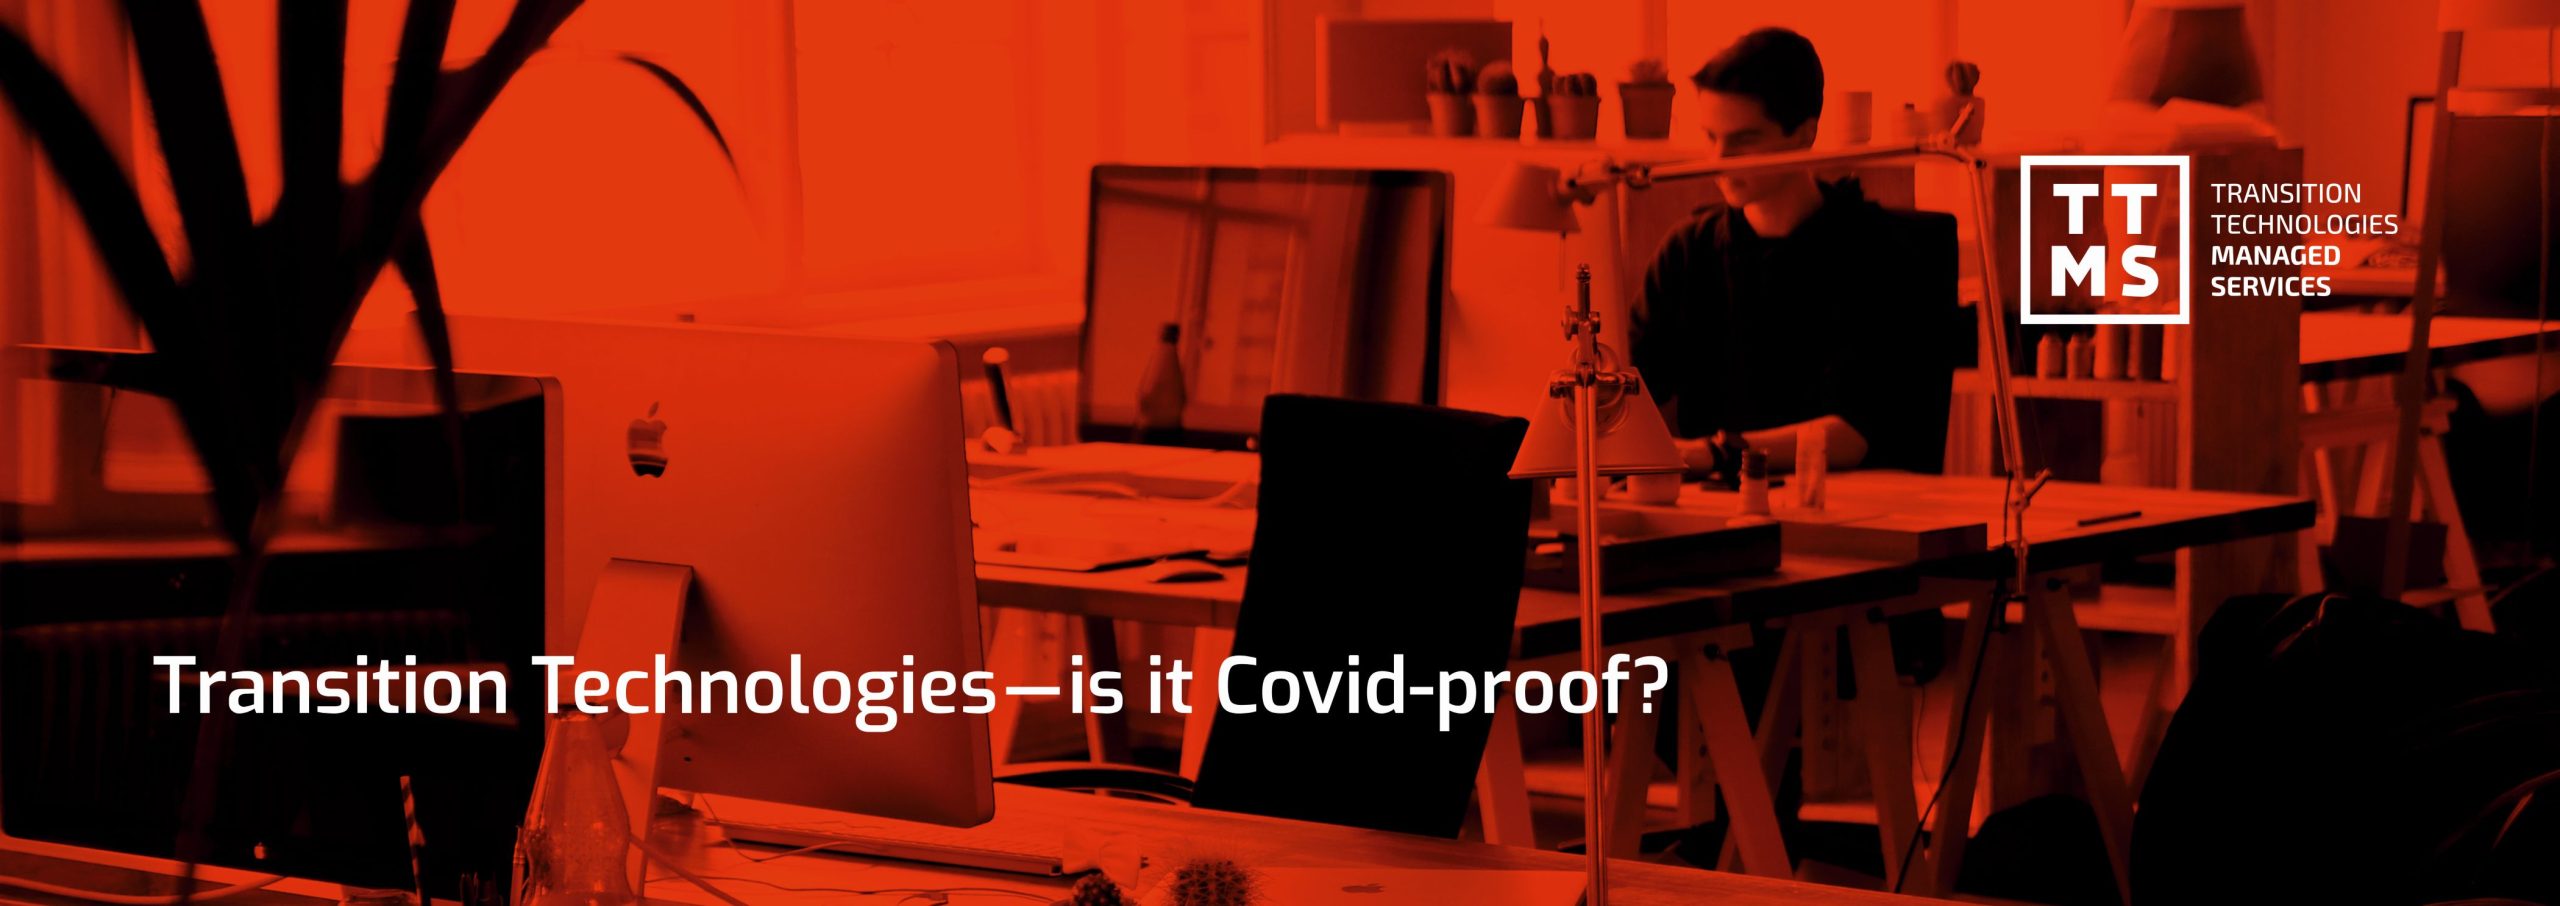 Transition Technologies — is it Covid-proof?